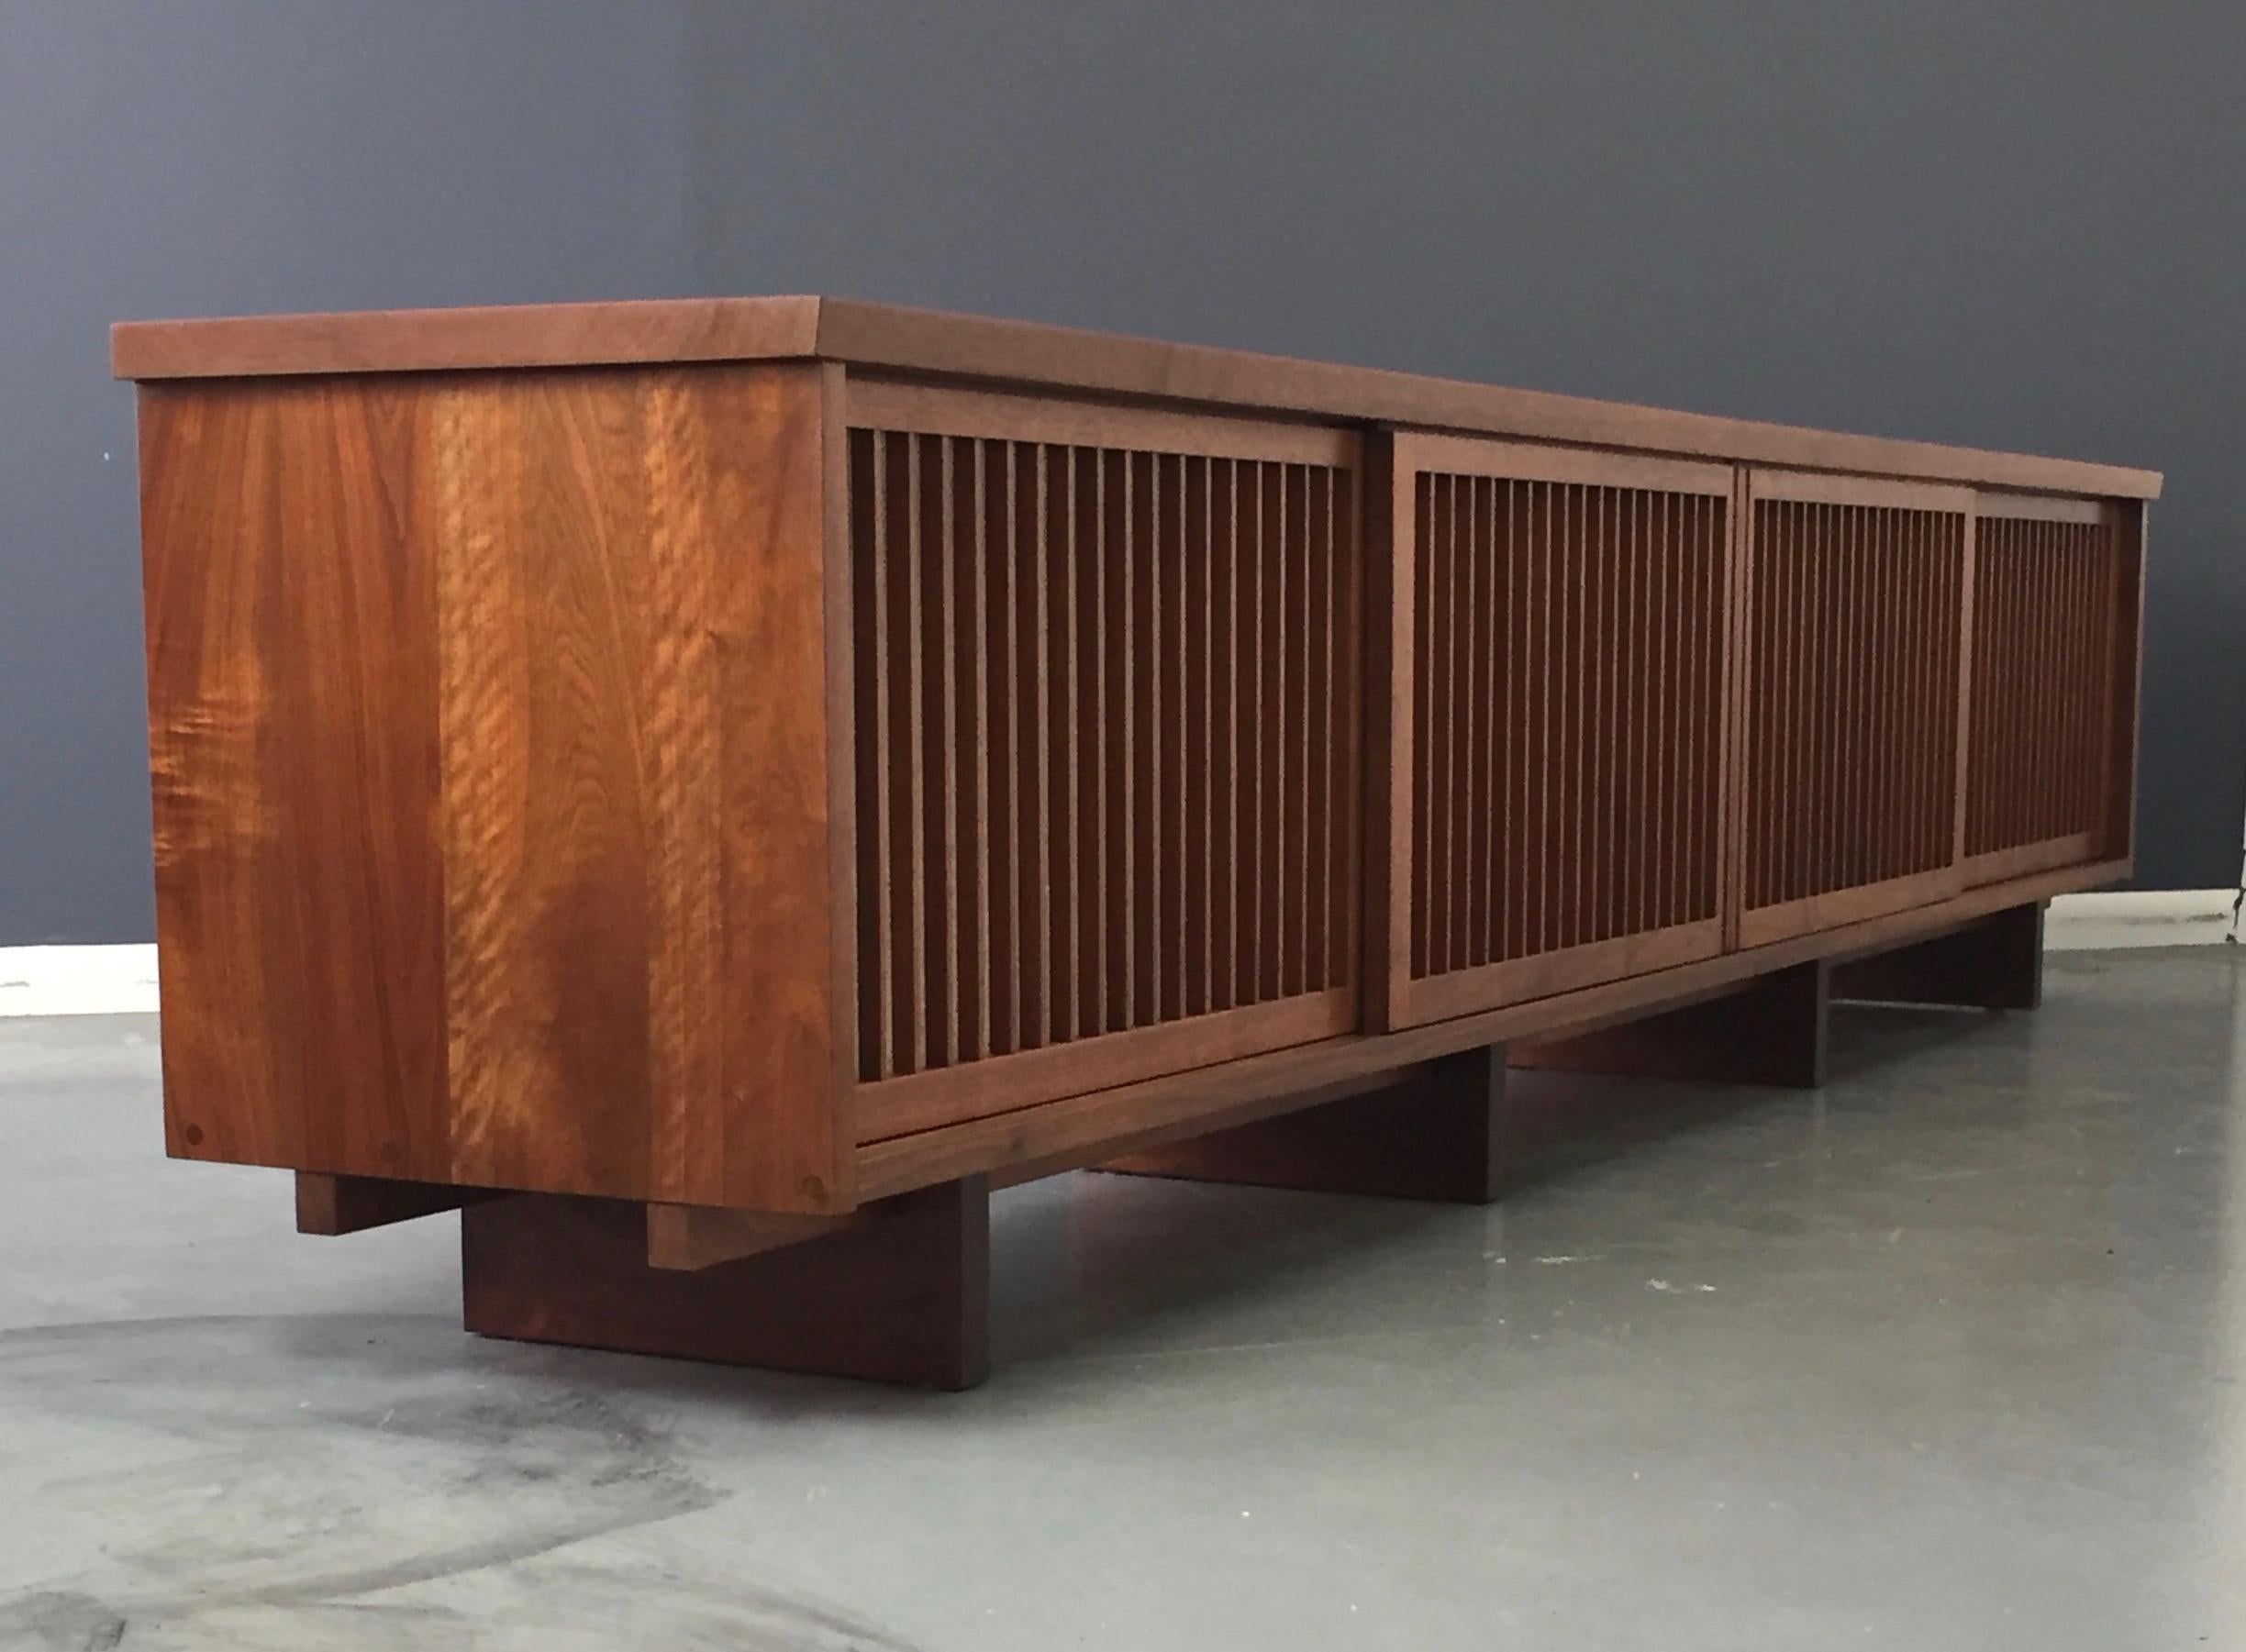 Mrs. J Faust commissioned George Nakashima in 1957 to produce this massive four sliding door credenza in walnut with a teak top for her home in Bala Cynwyd Pennsylvania. The description of the credenza is evidenced by the 